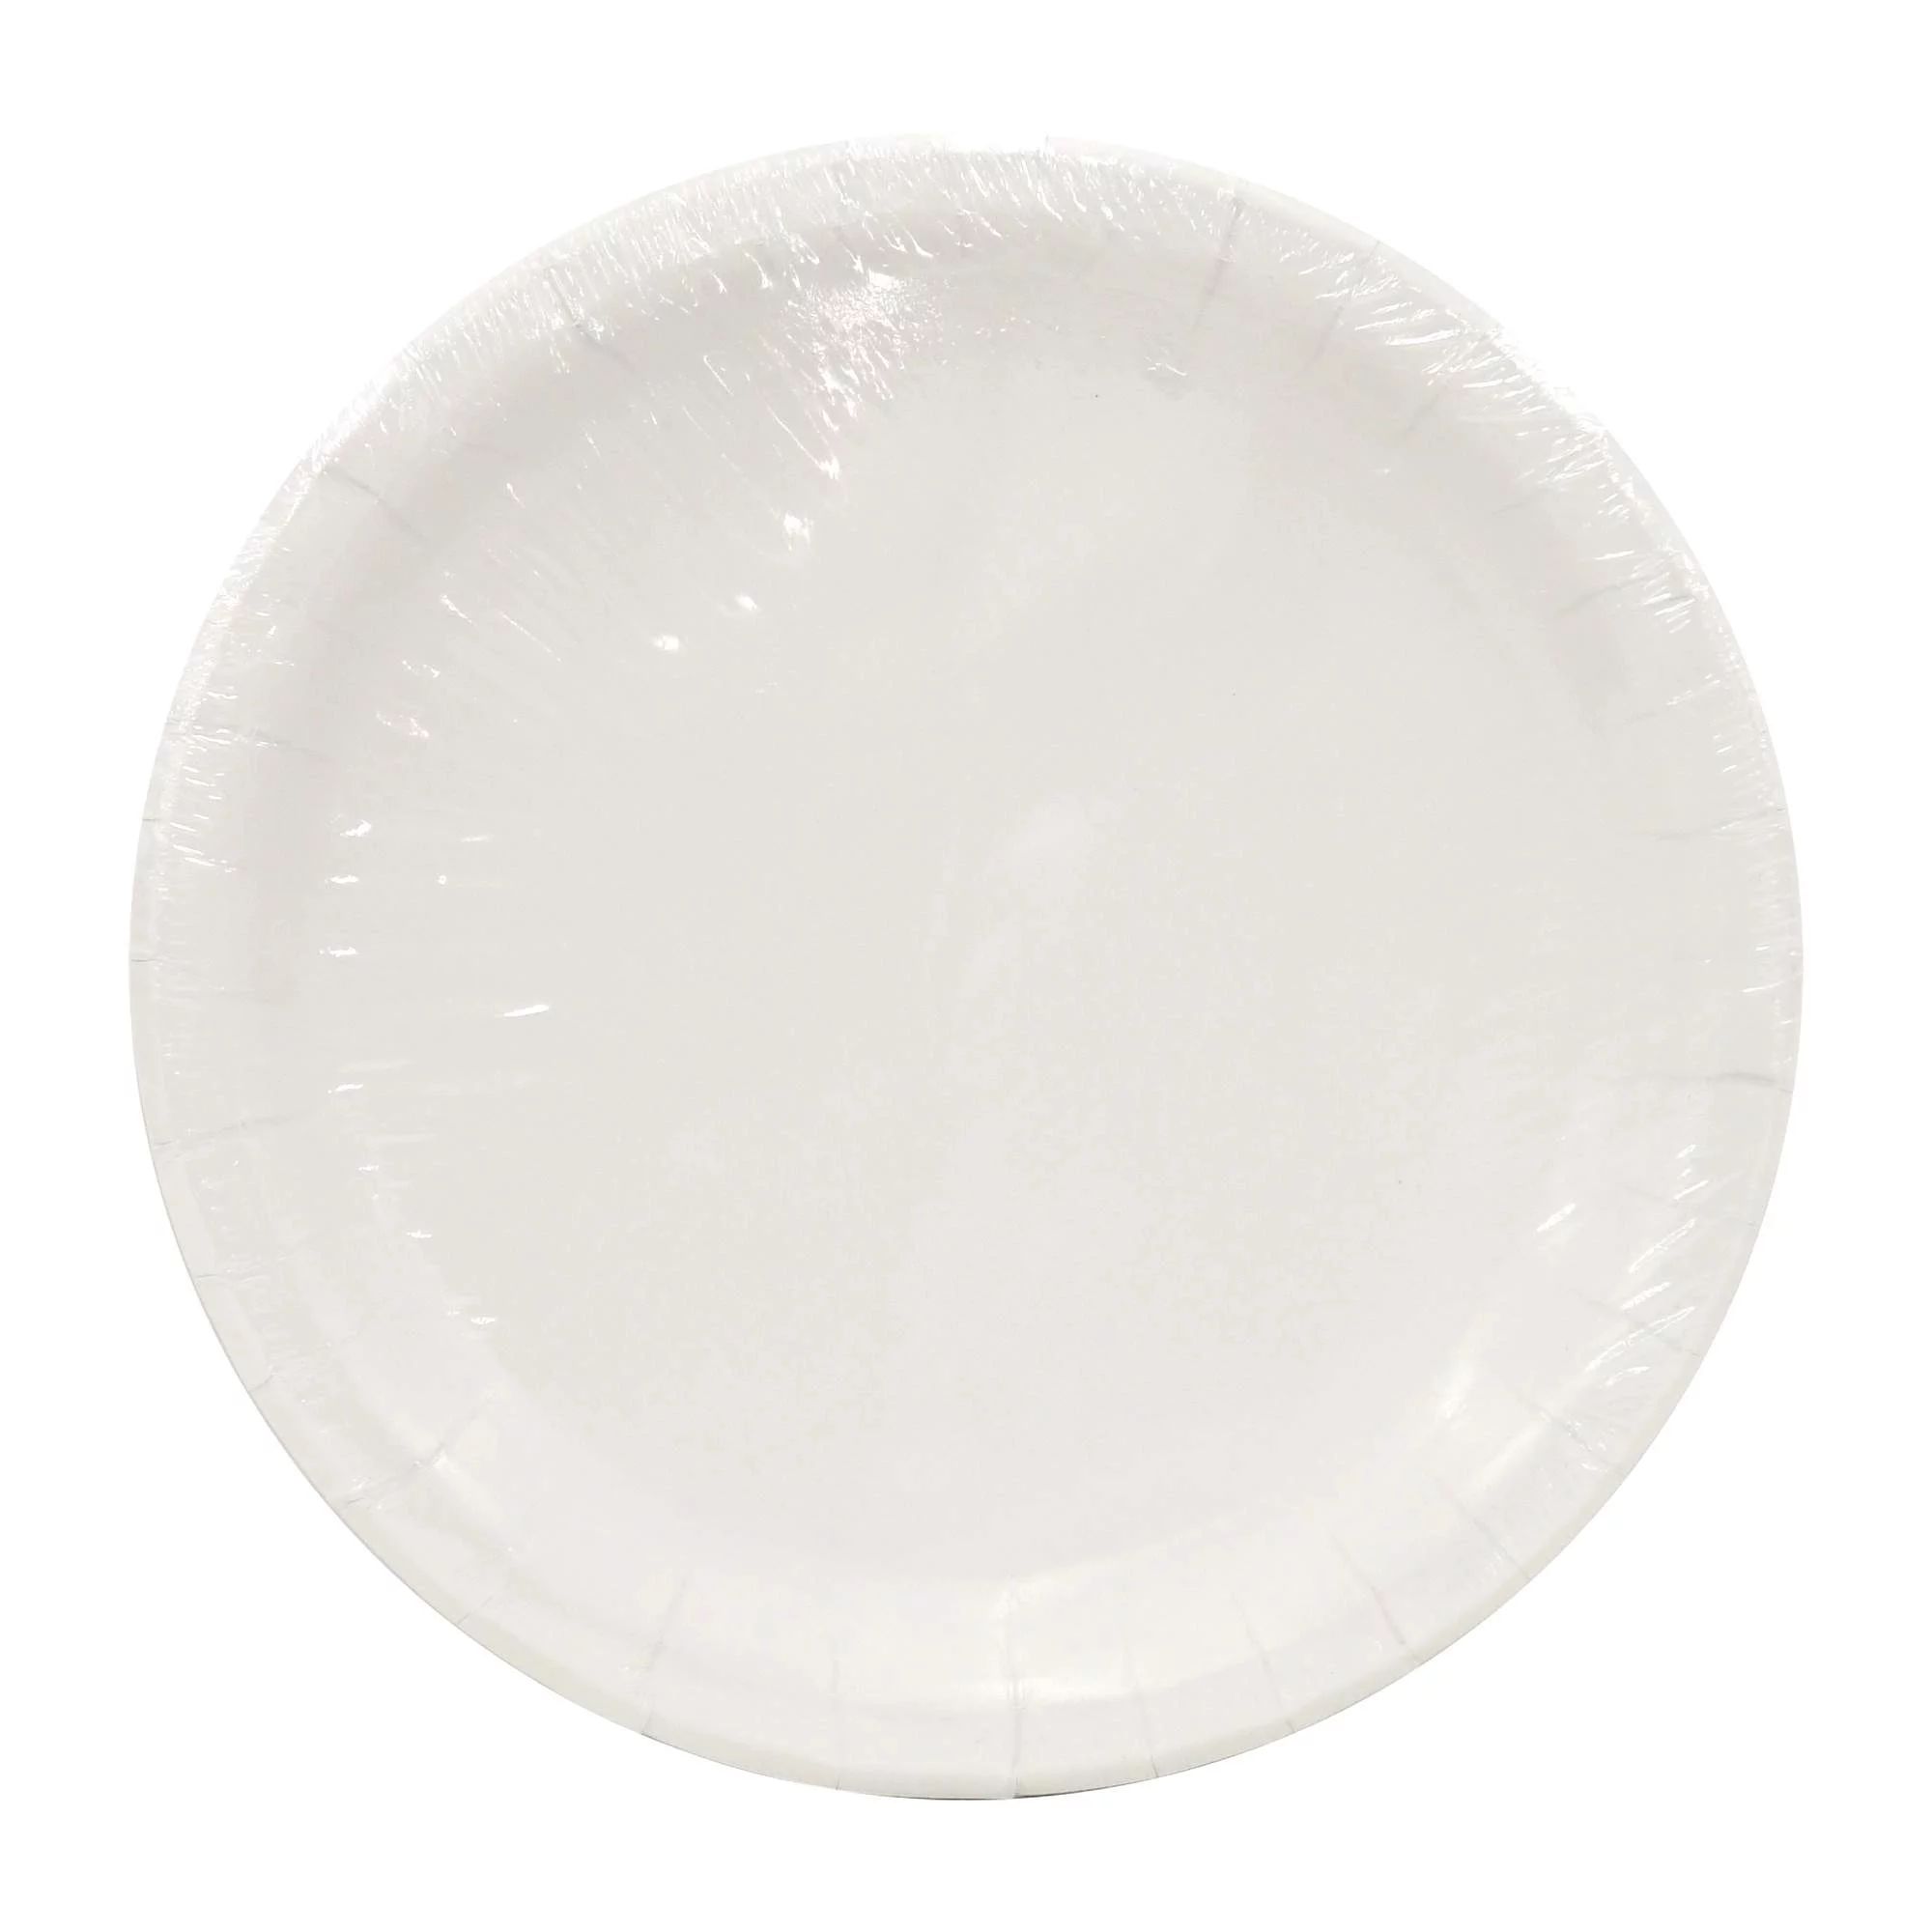 Way to Celebrate! White Paper Dinner Plates, 9in, 20ct | Walmart (US)